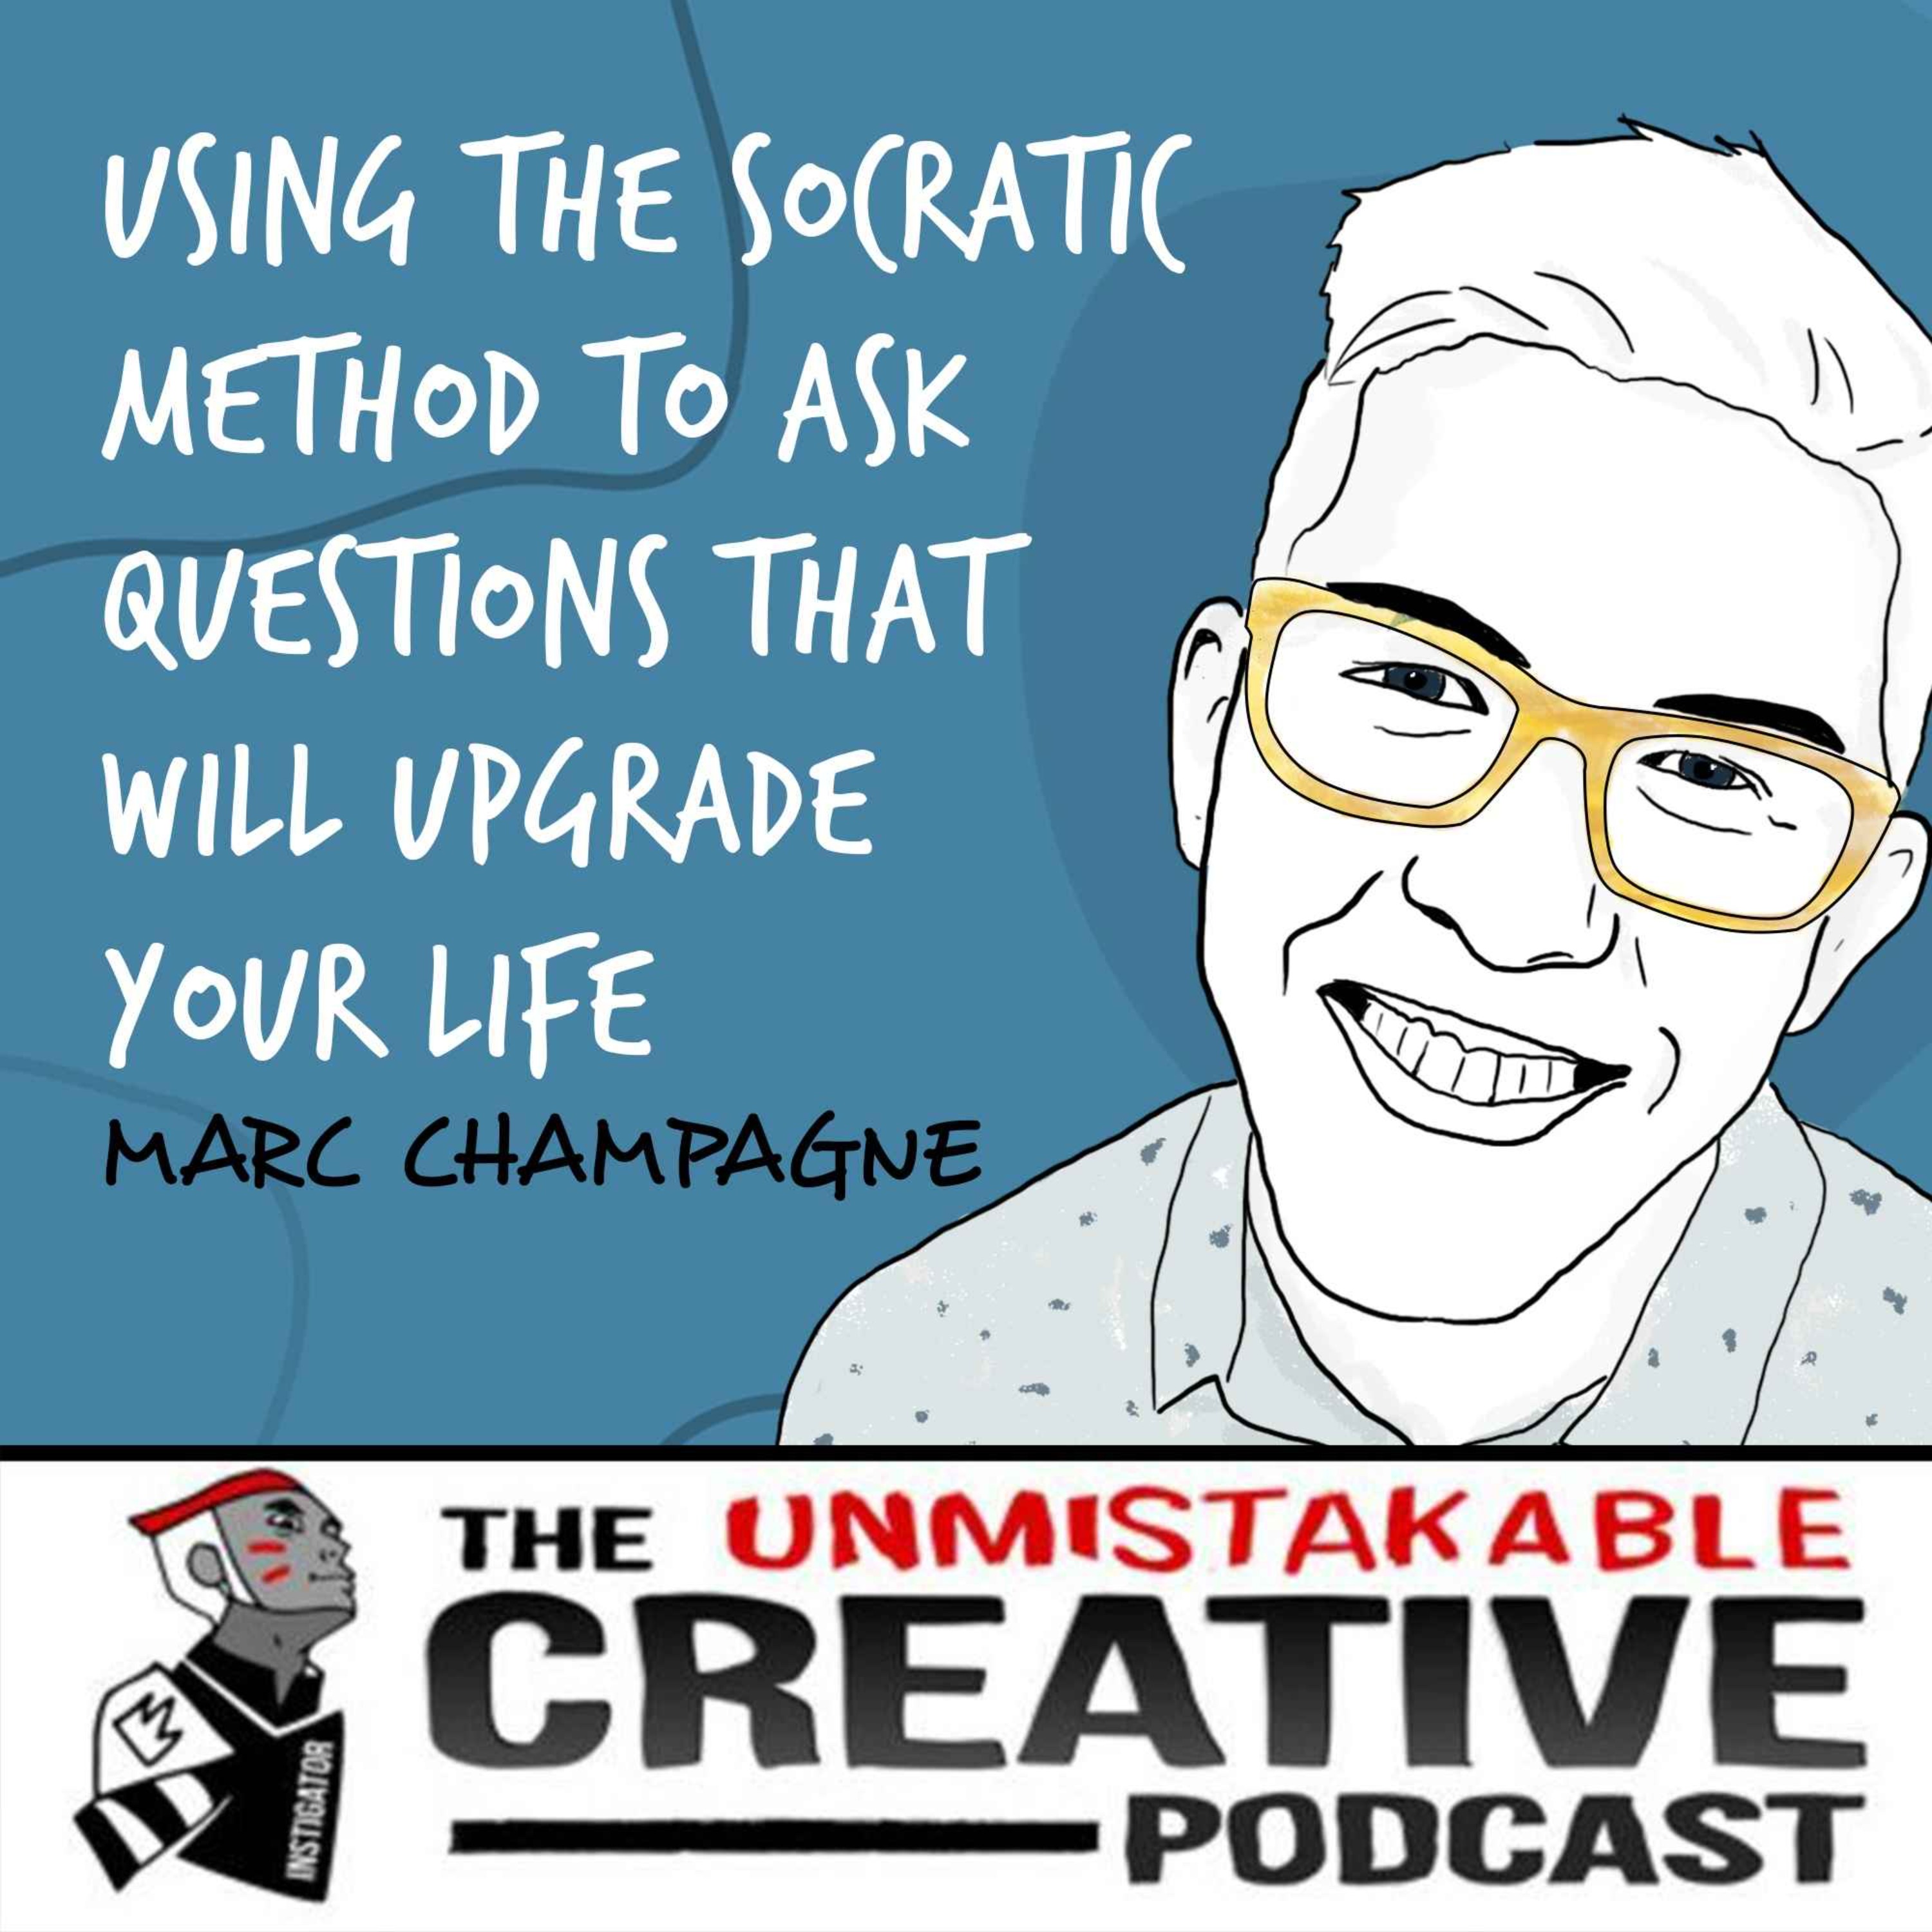 Marc Champagne | Using the Socratic Method to Ask Questions that Will Upgrade Your Life Image